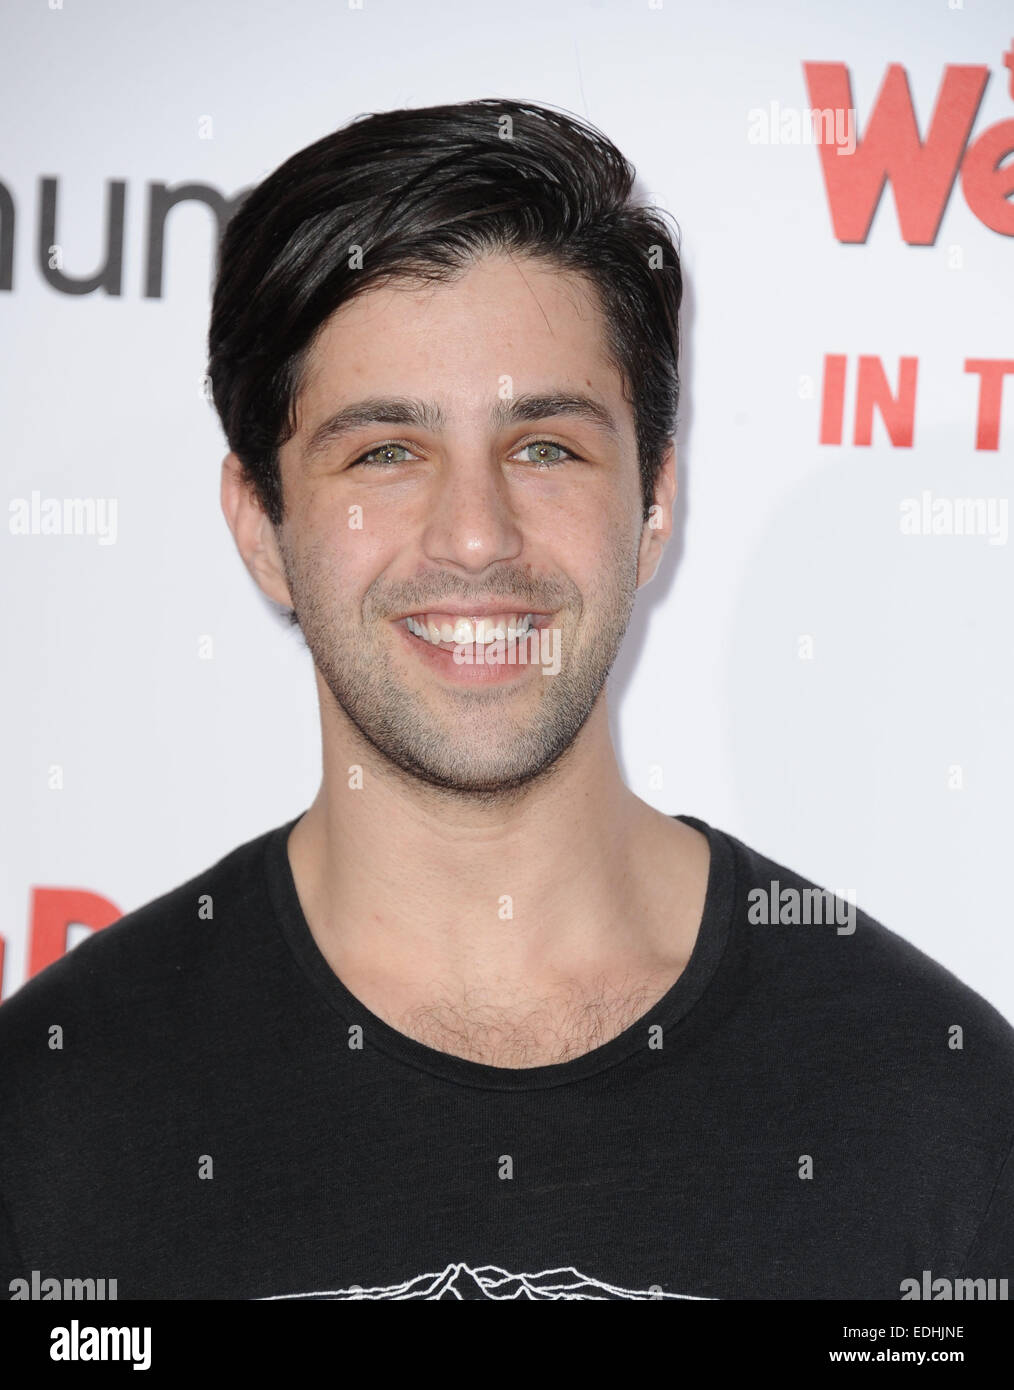 Josh Peck attending the premiere of 'The Wedding Ringer' Stock Photo - Alamy